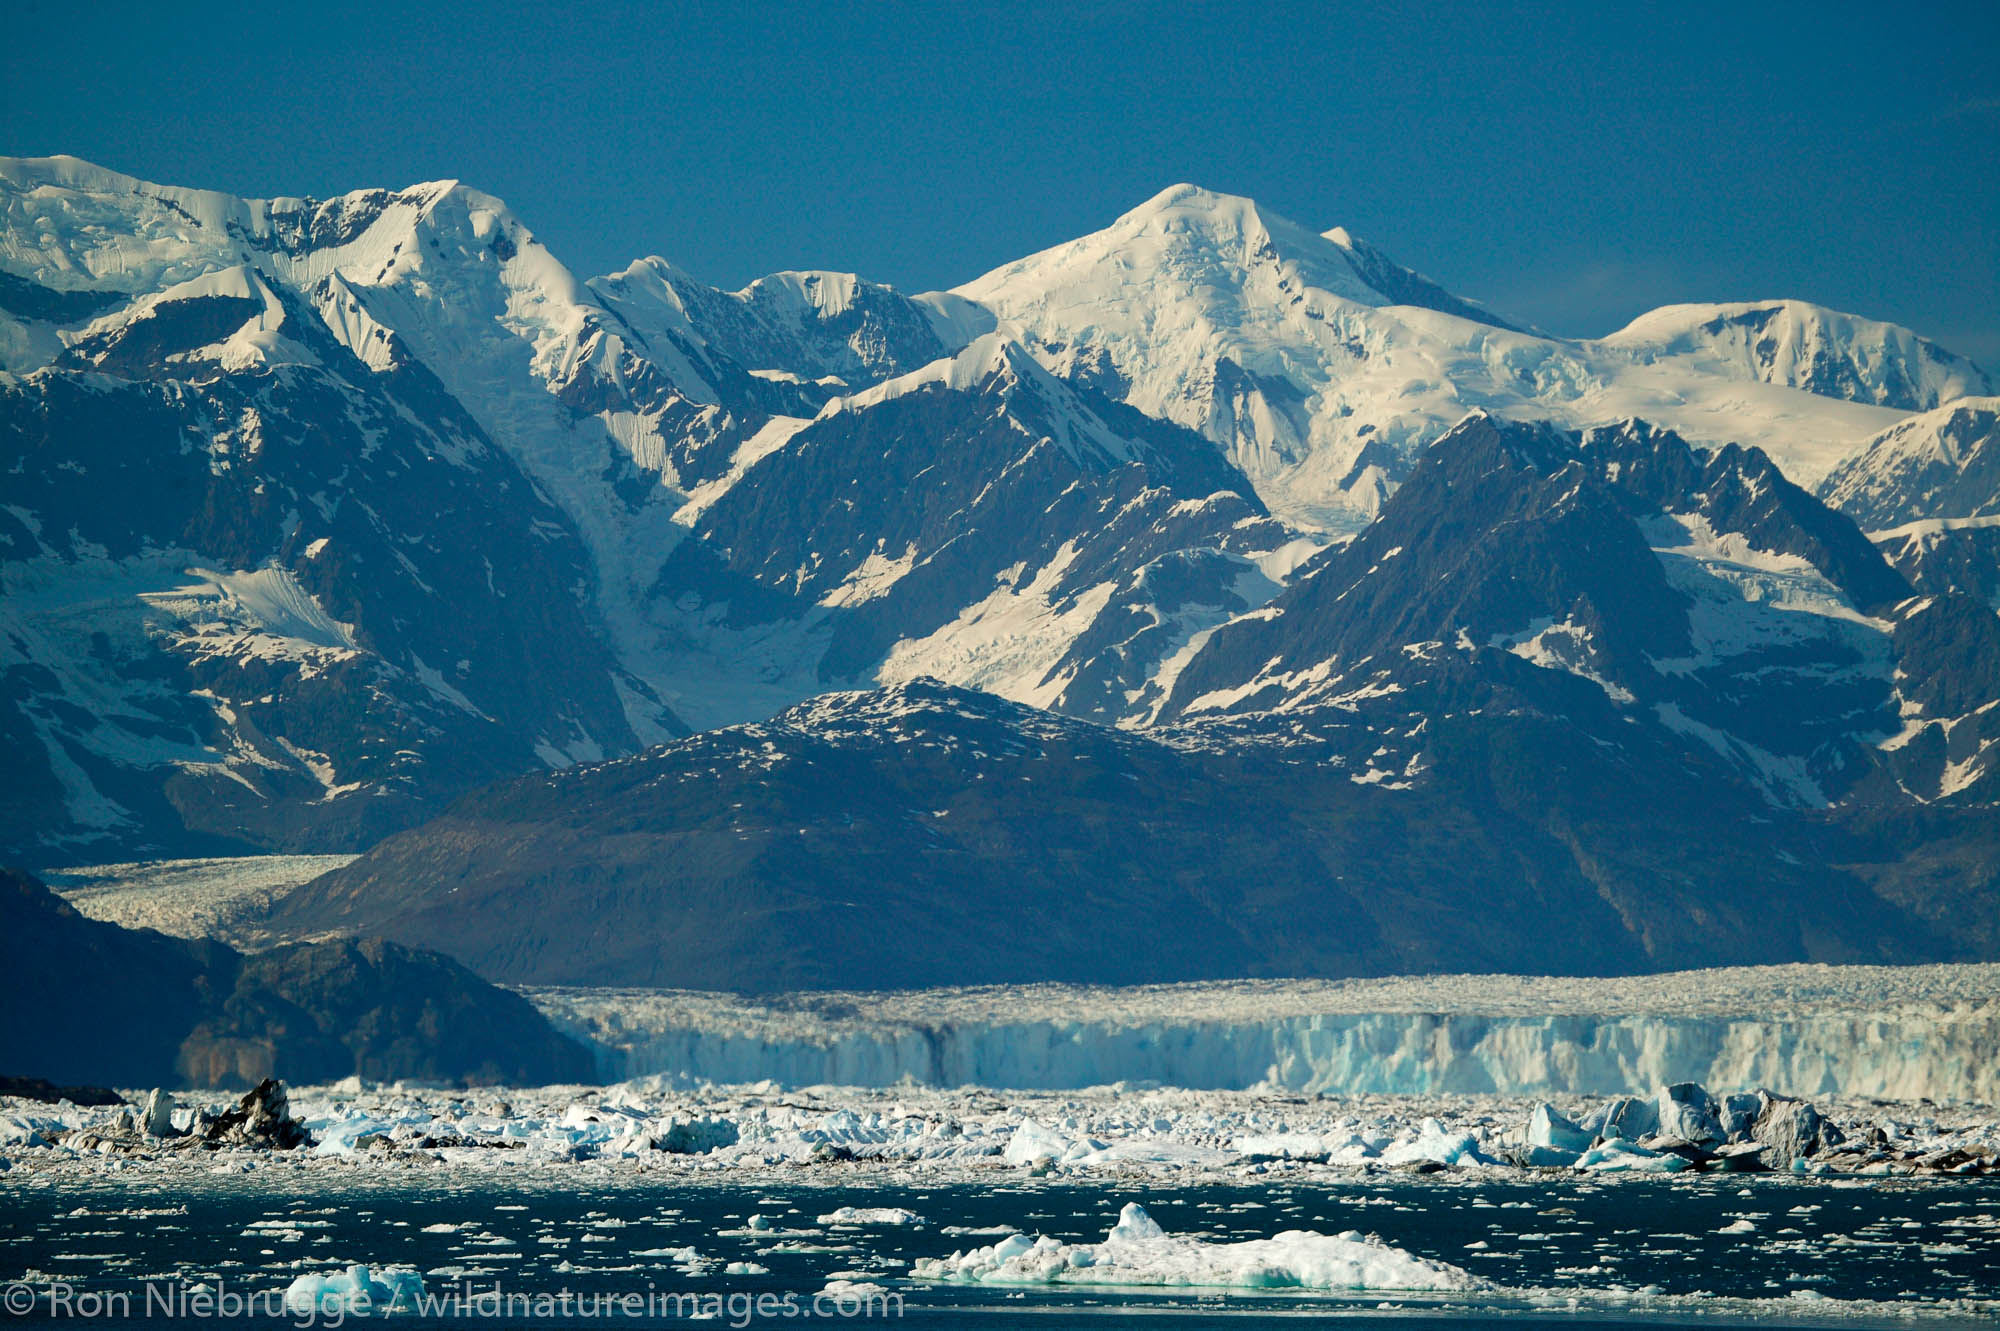 The Columbia Glacier and Columbia Bay from the Alaska State Ferry Aurora, Prince William Sound, Alaska.